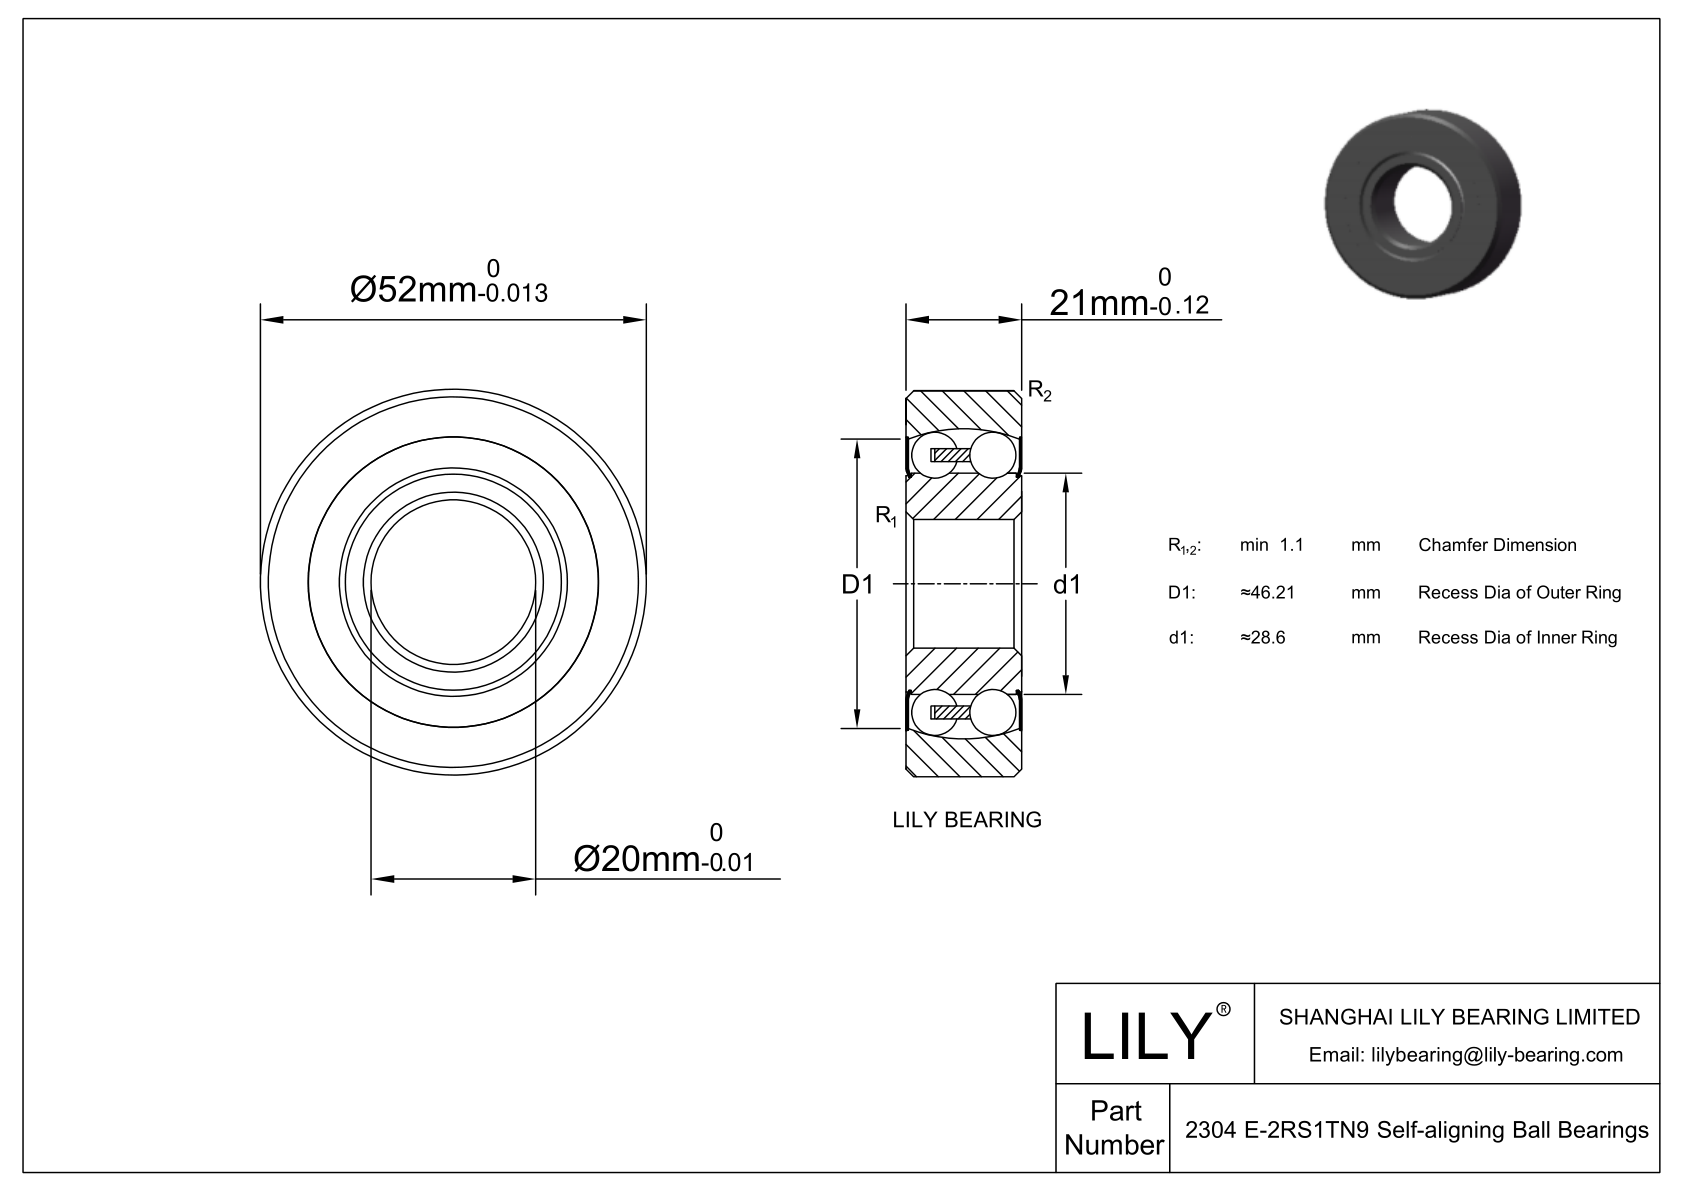 CE2304 E-SIPP Silicon Nitride Self Aligning Ball Bearings cad drawing